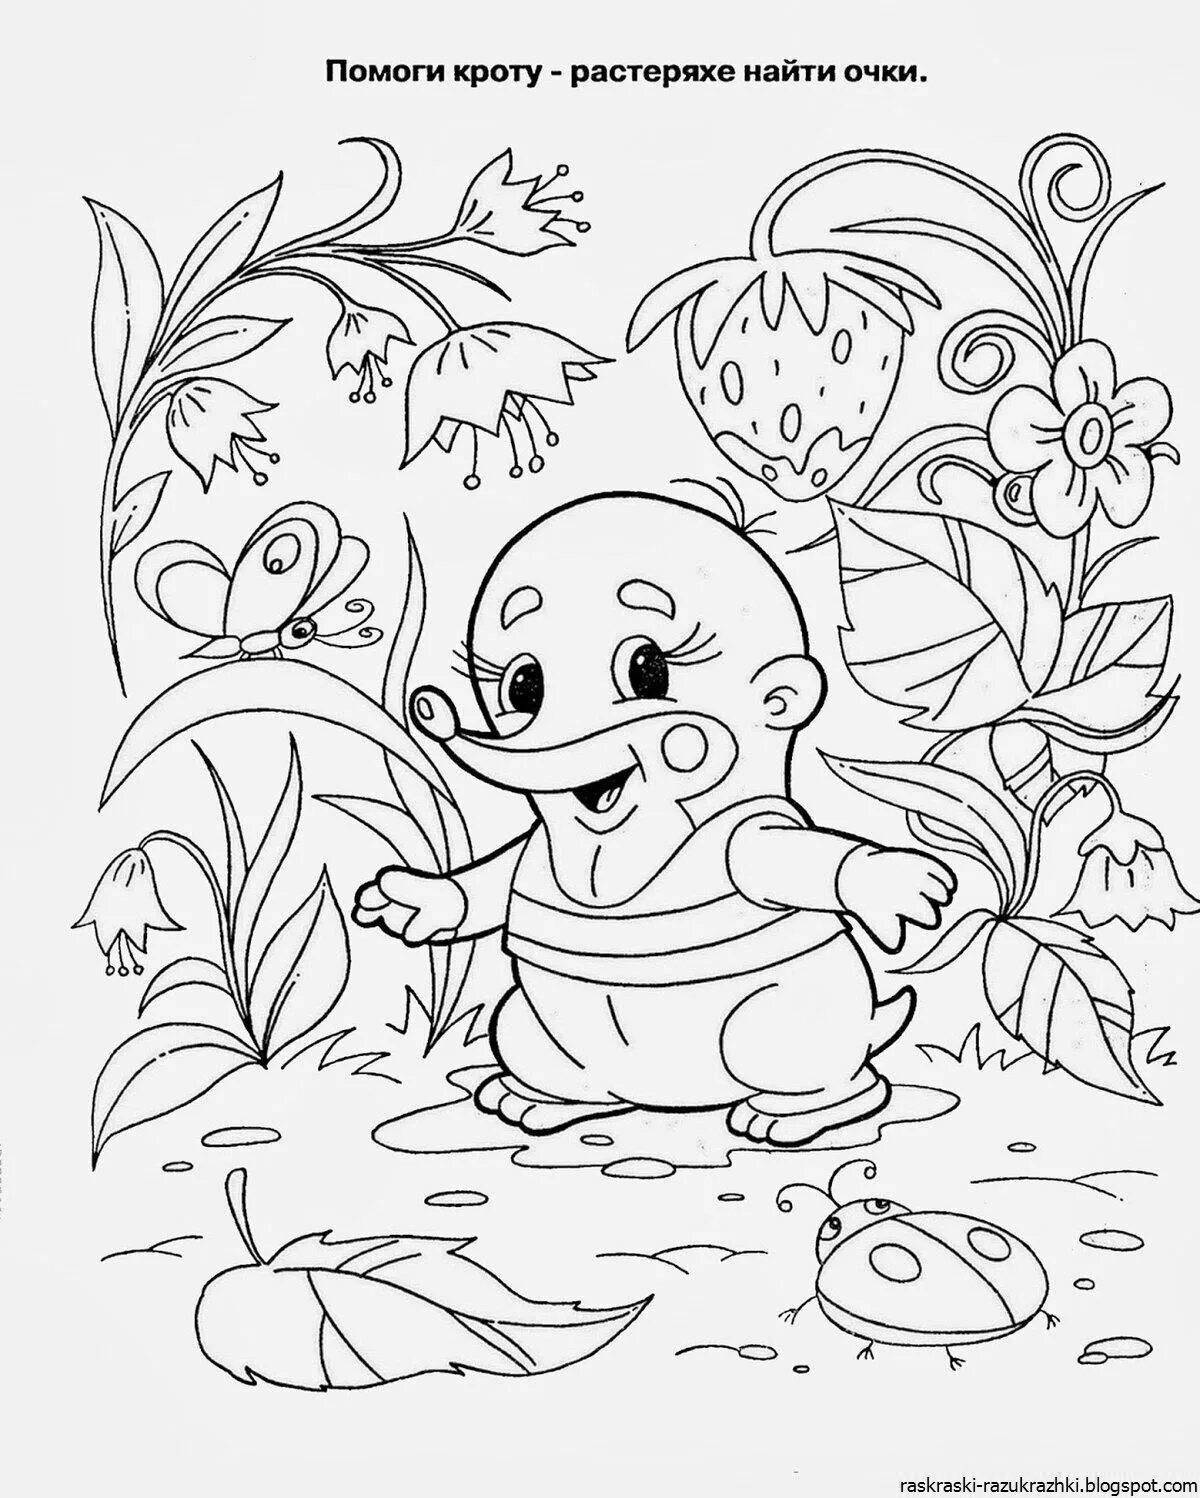 Coloring book for preschoolers 6-7 years old